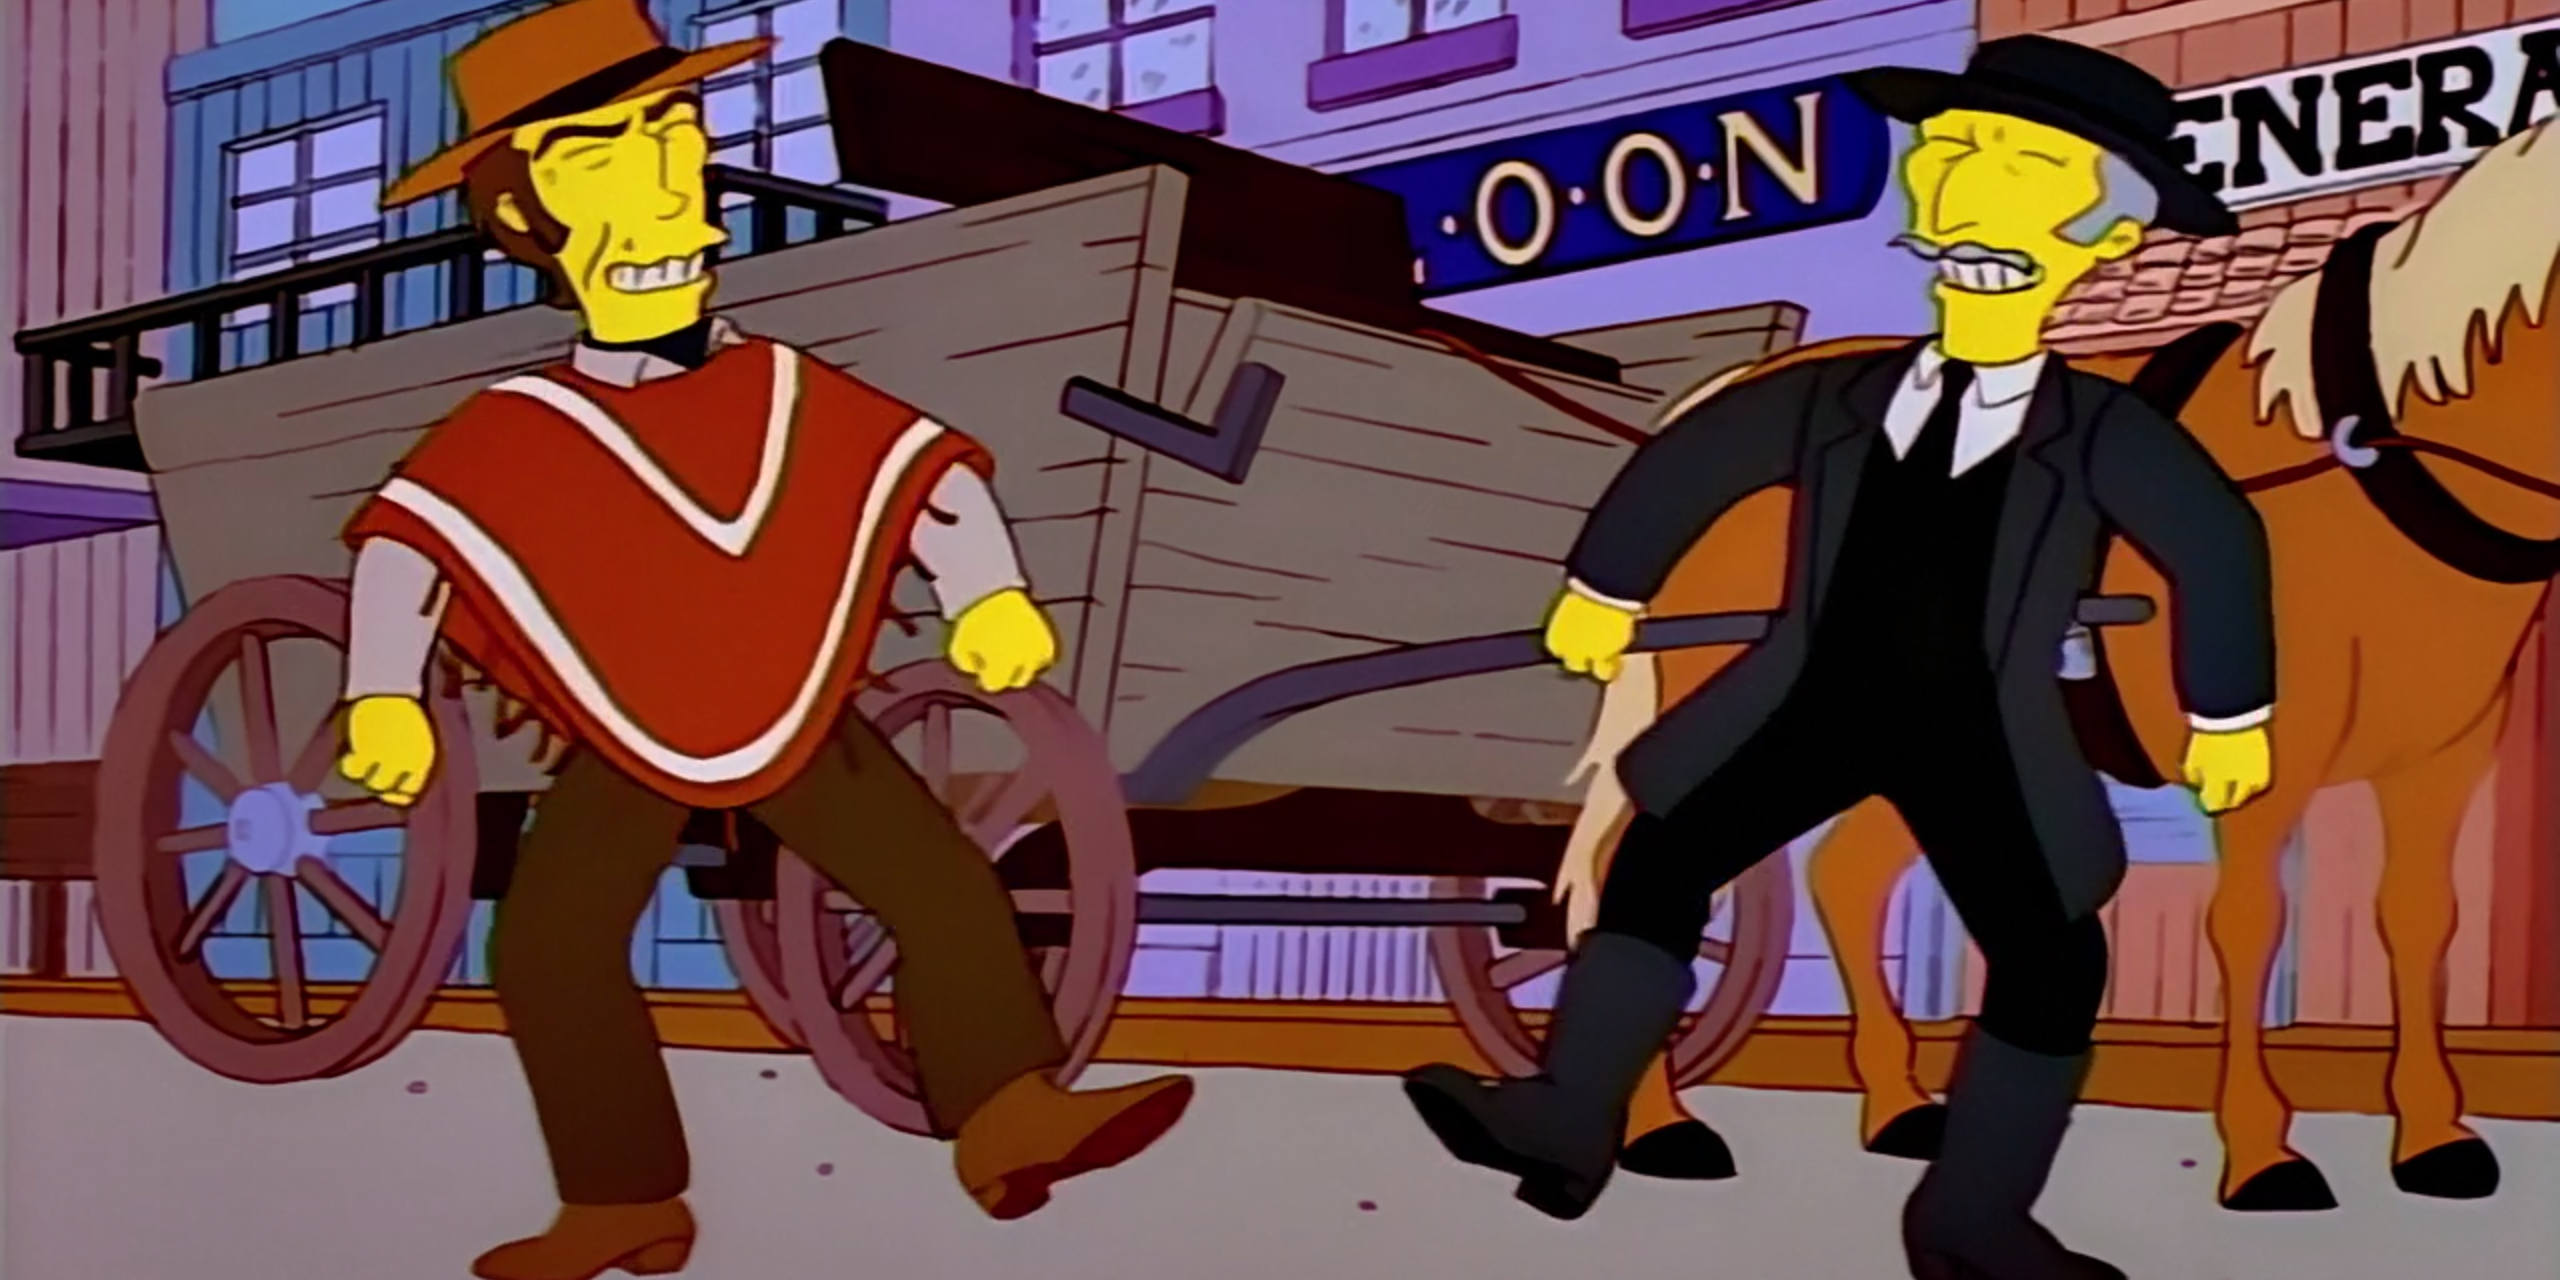 The Simpsons parody of 'Paint Your Wagon' starring Clint Eastwood and Lee Van Cleef